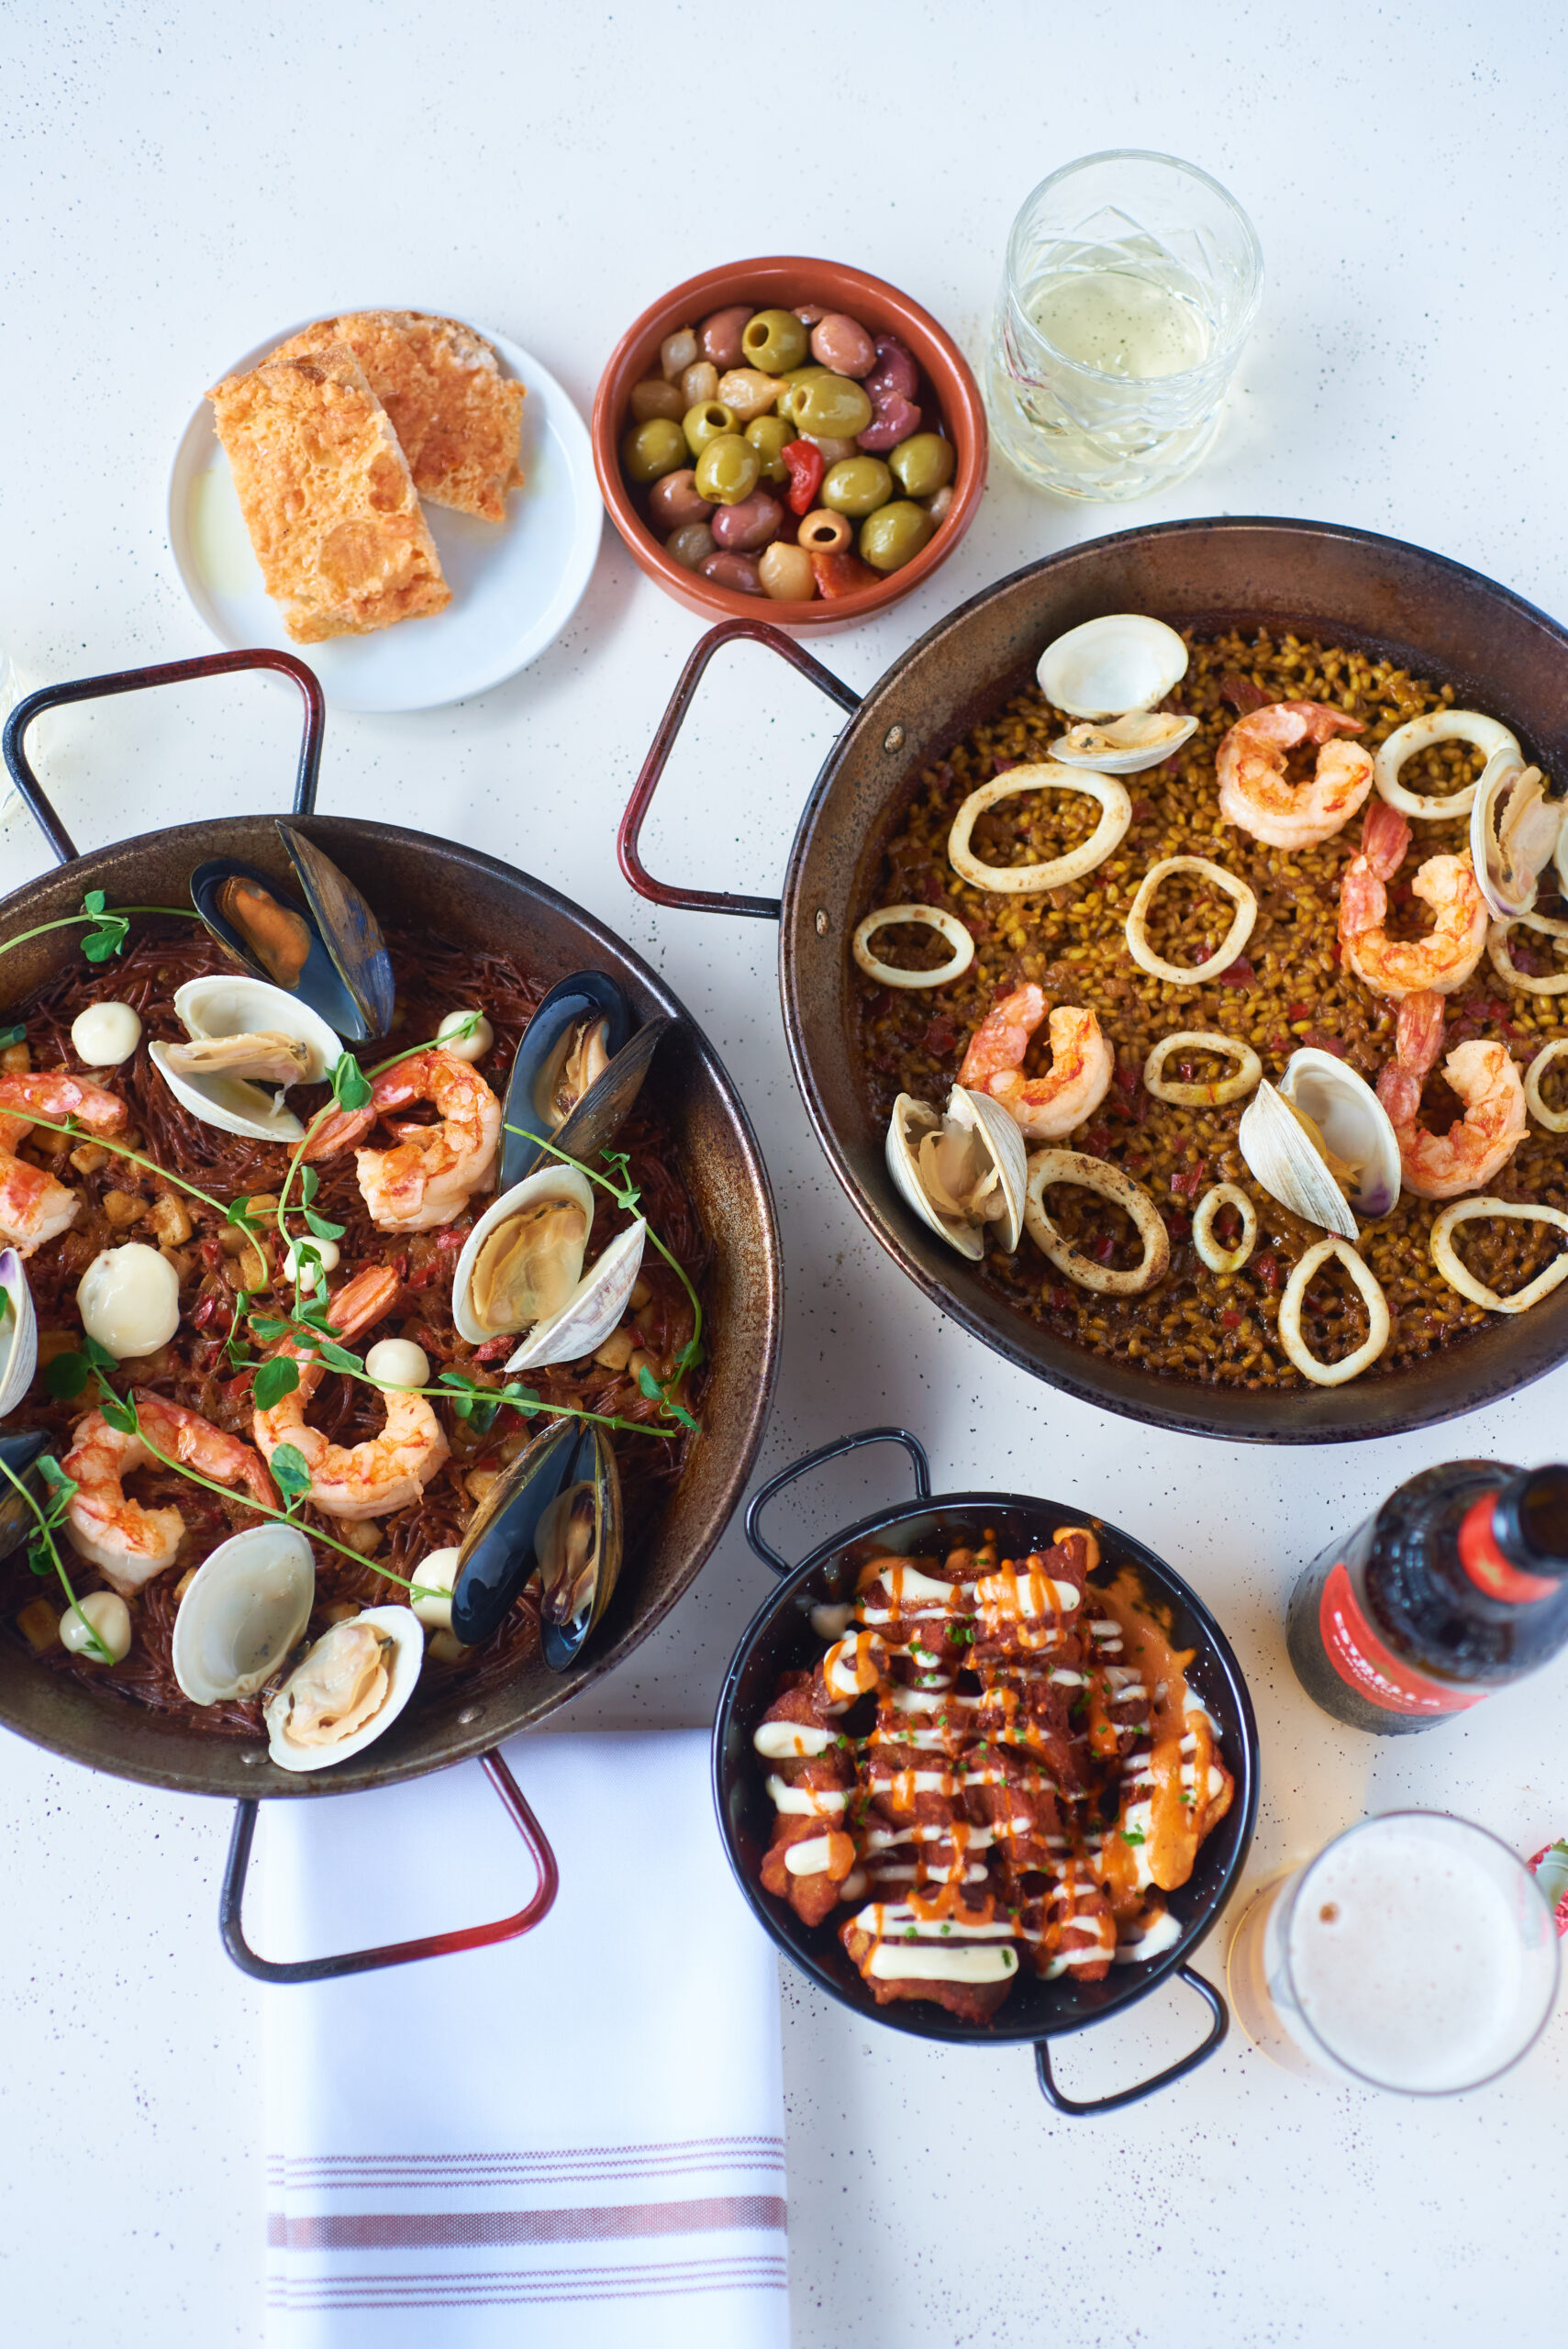 Chef Alex Bujorneau will create three different paellas for R.Aire Restaurant's first Paella Party on March 27. COURTESY R.AIRE RESTAURANT